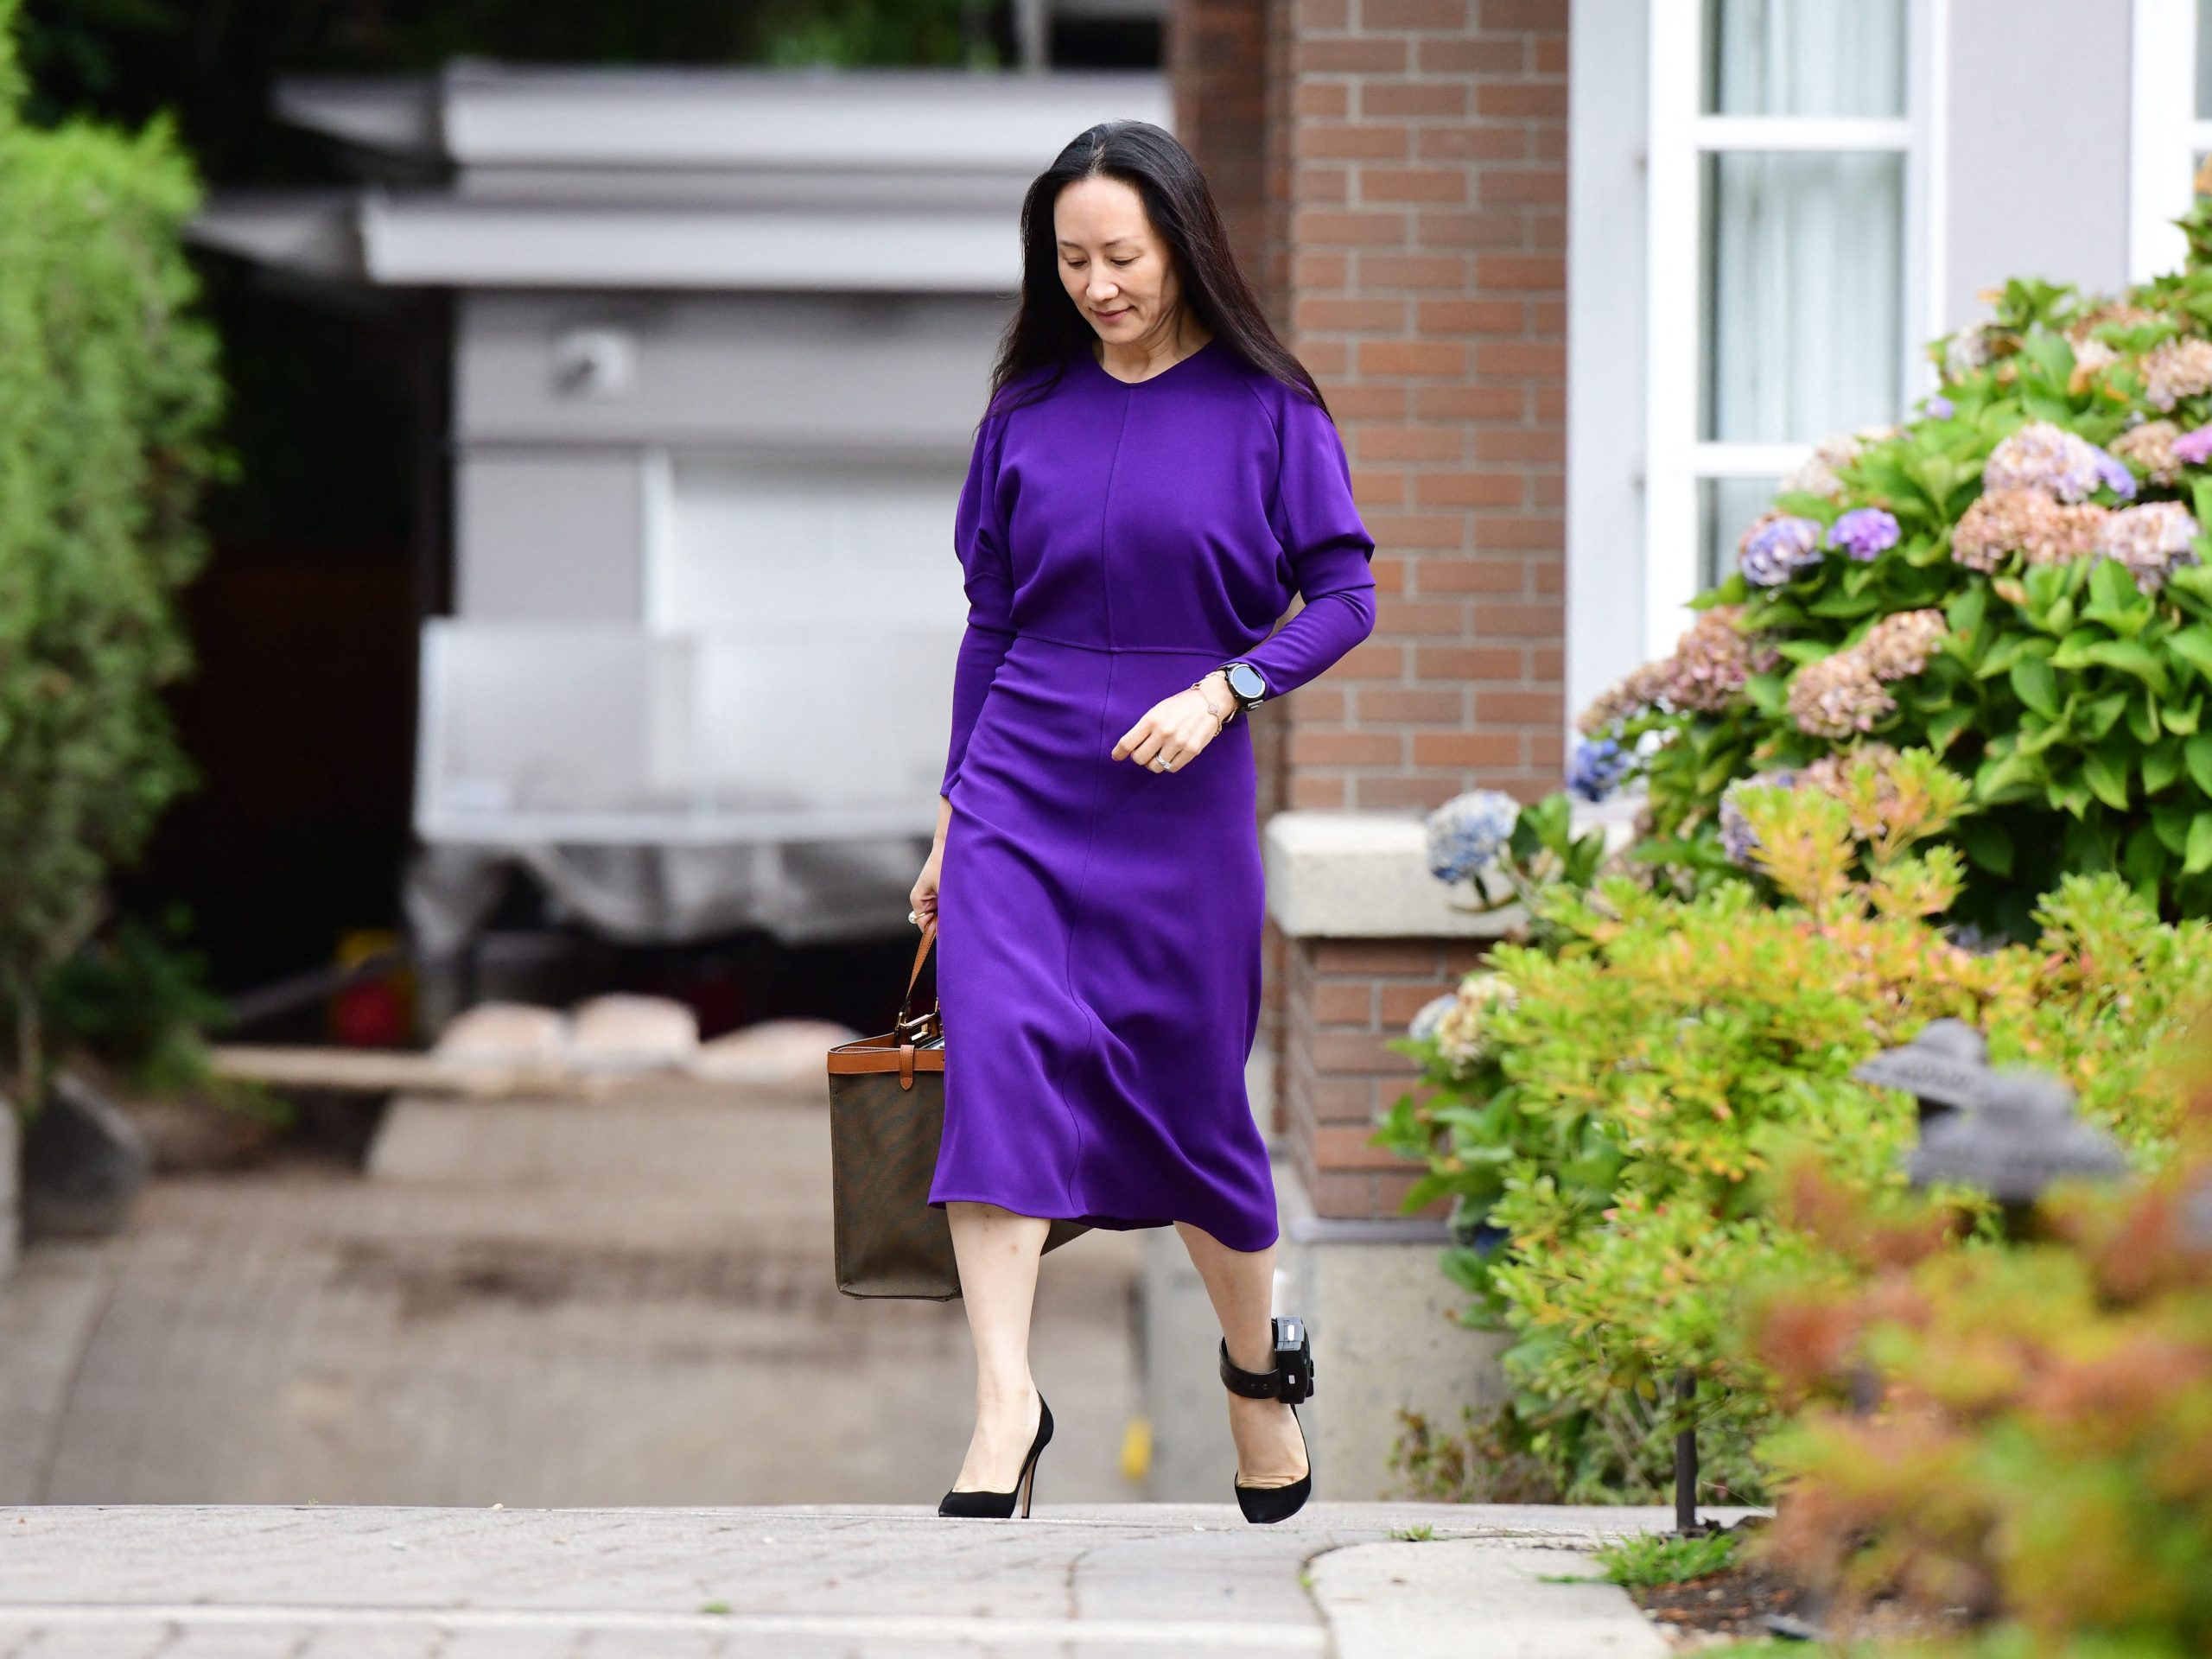 Huawei Chief Financial Officer Meng Wanzhou leaves her Vancouver home to attend her last extradition hearing in British Columbia Supreme Court, on August 18, 2021 in Vancouver, Canada.